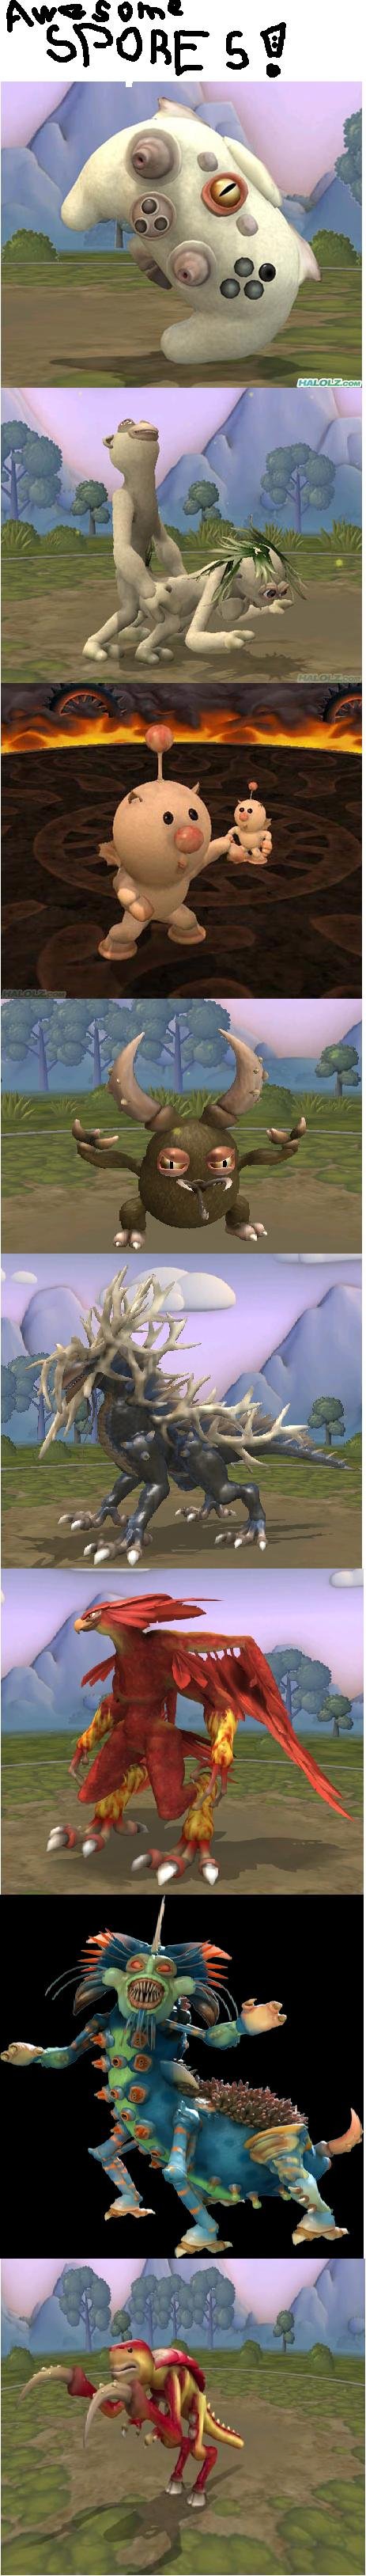 awesome spore creations gremlins